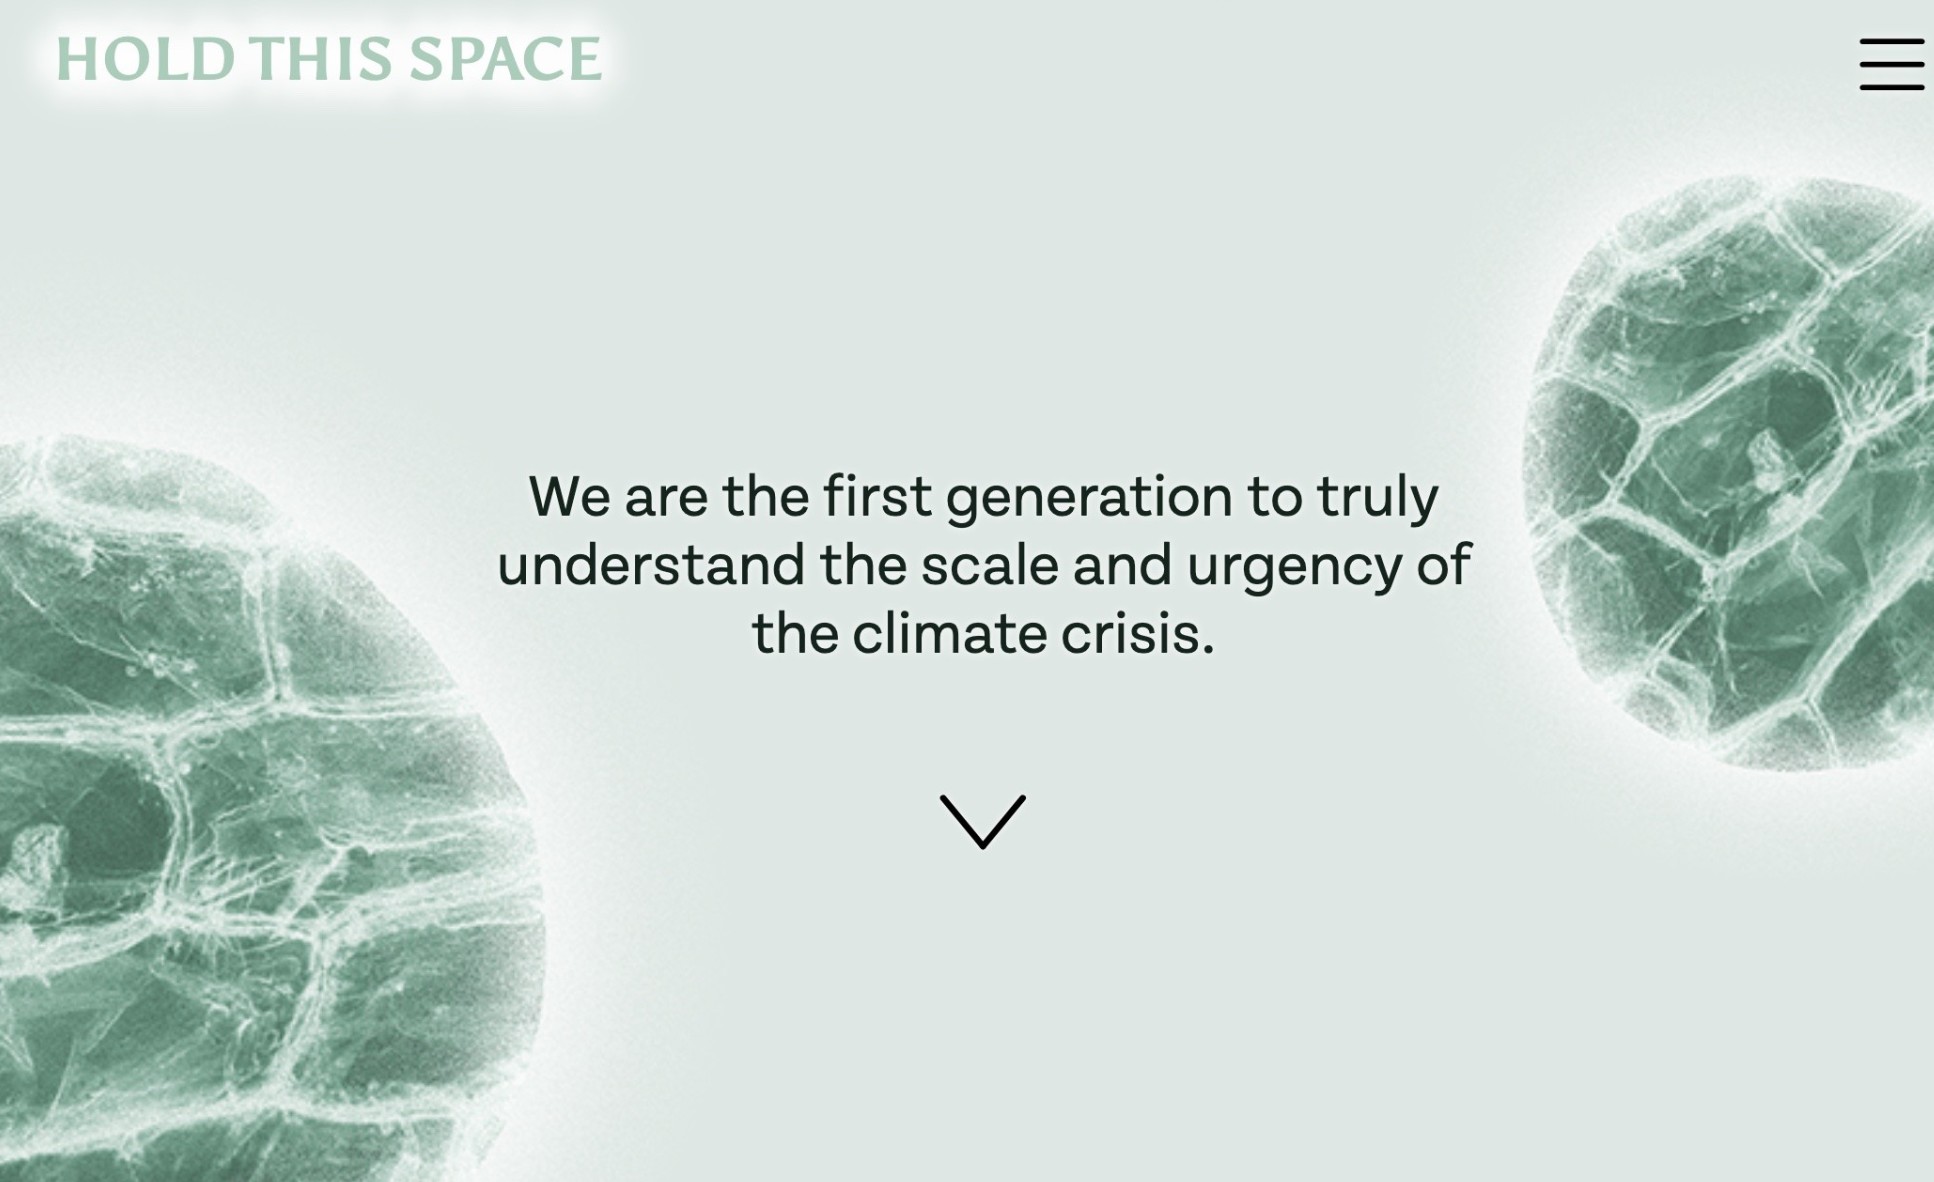 A screenshot from the Hold This Space website